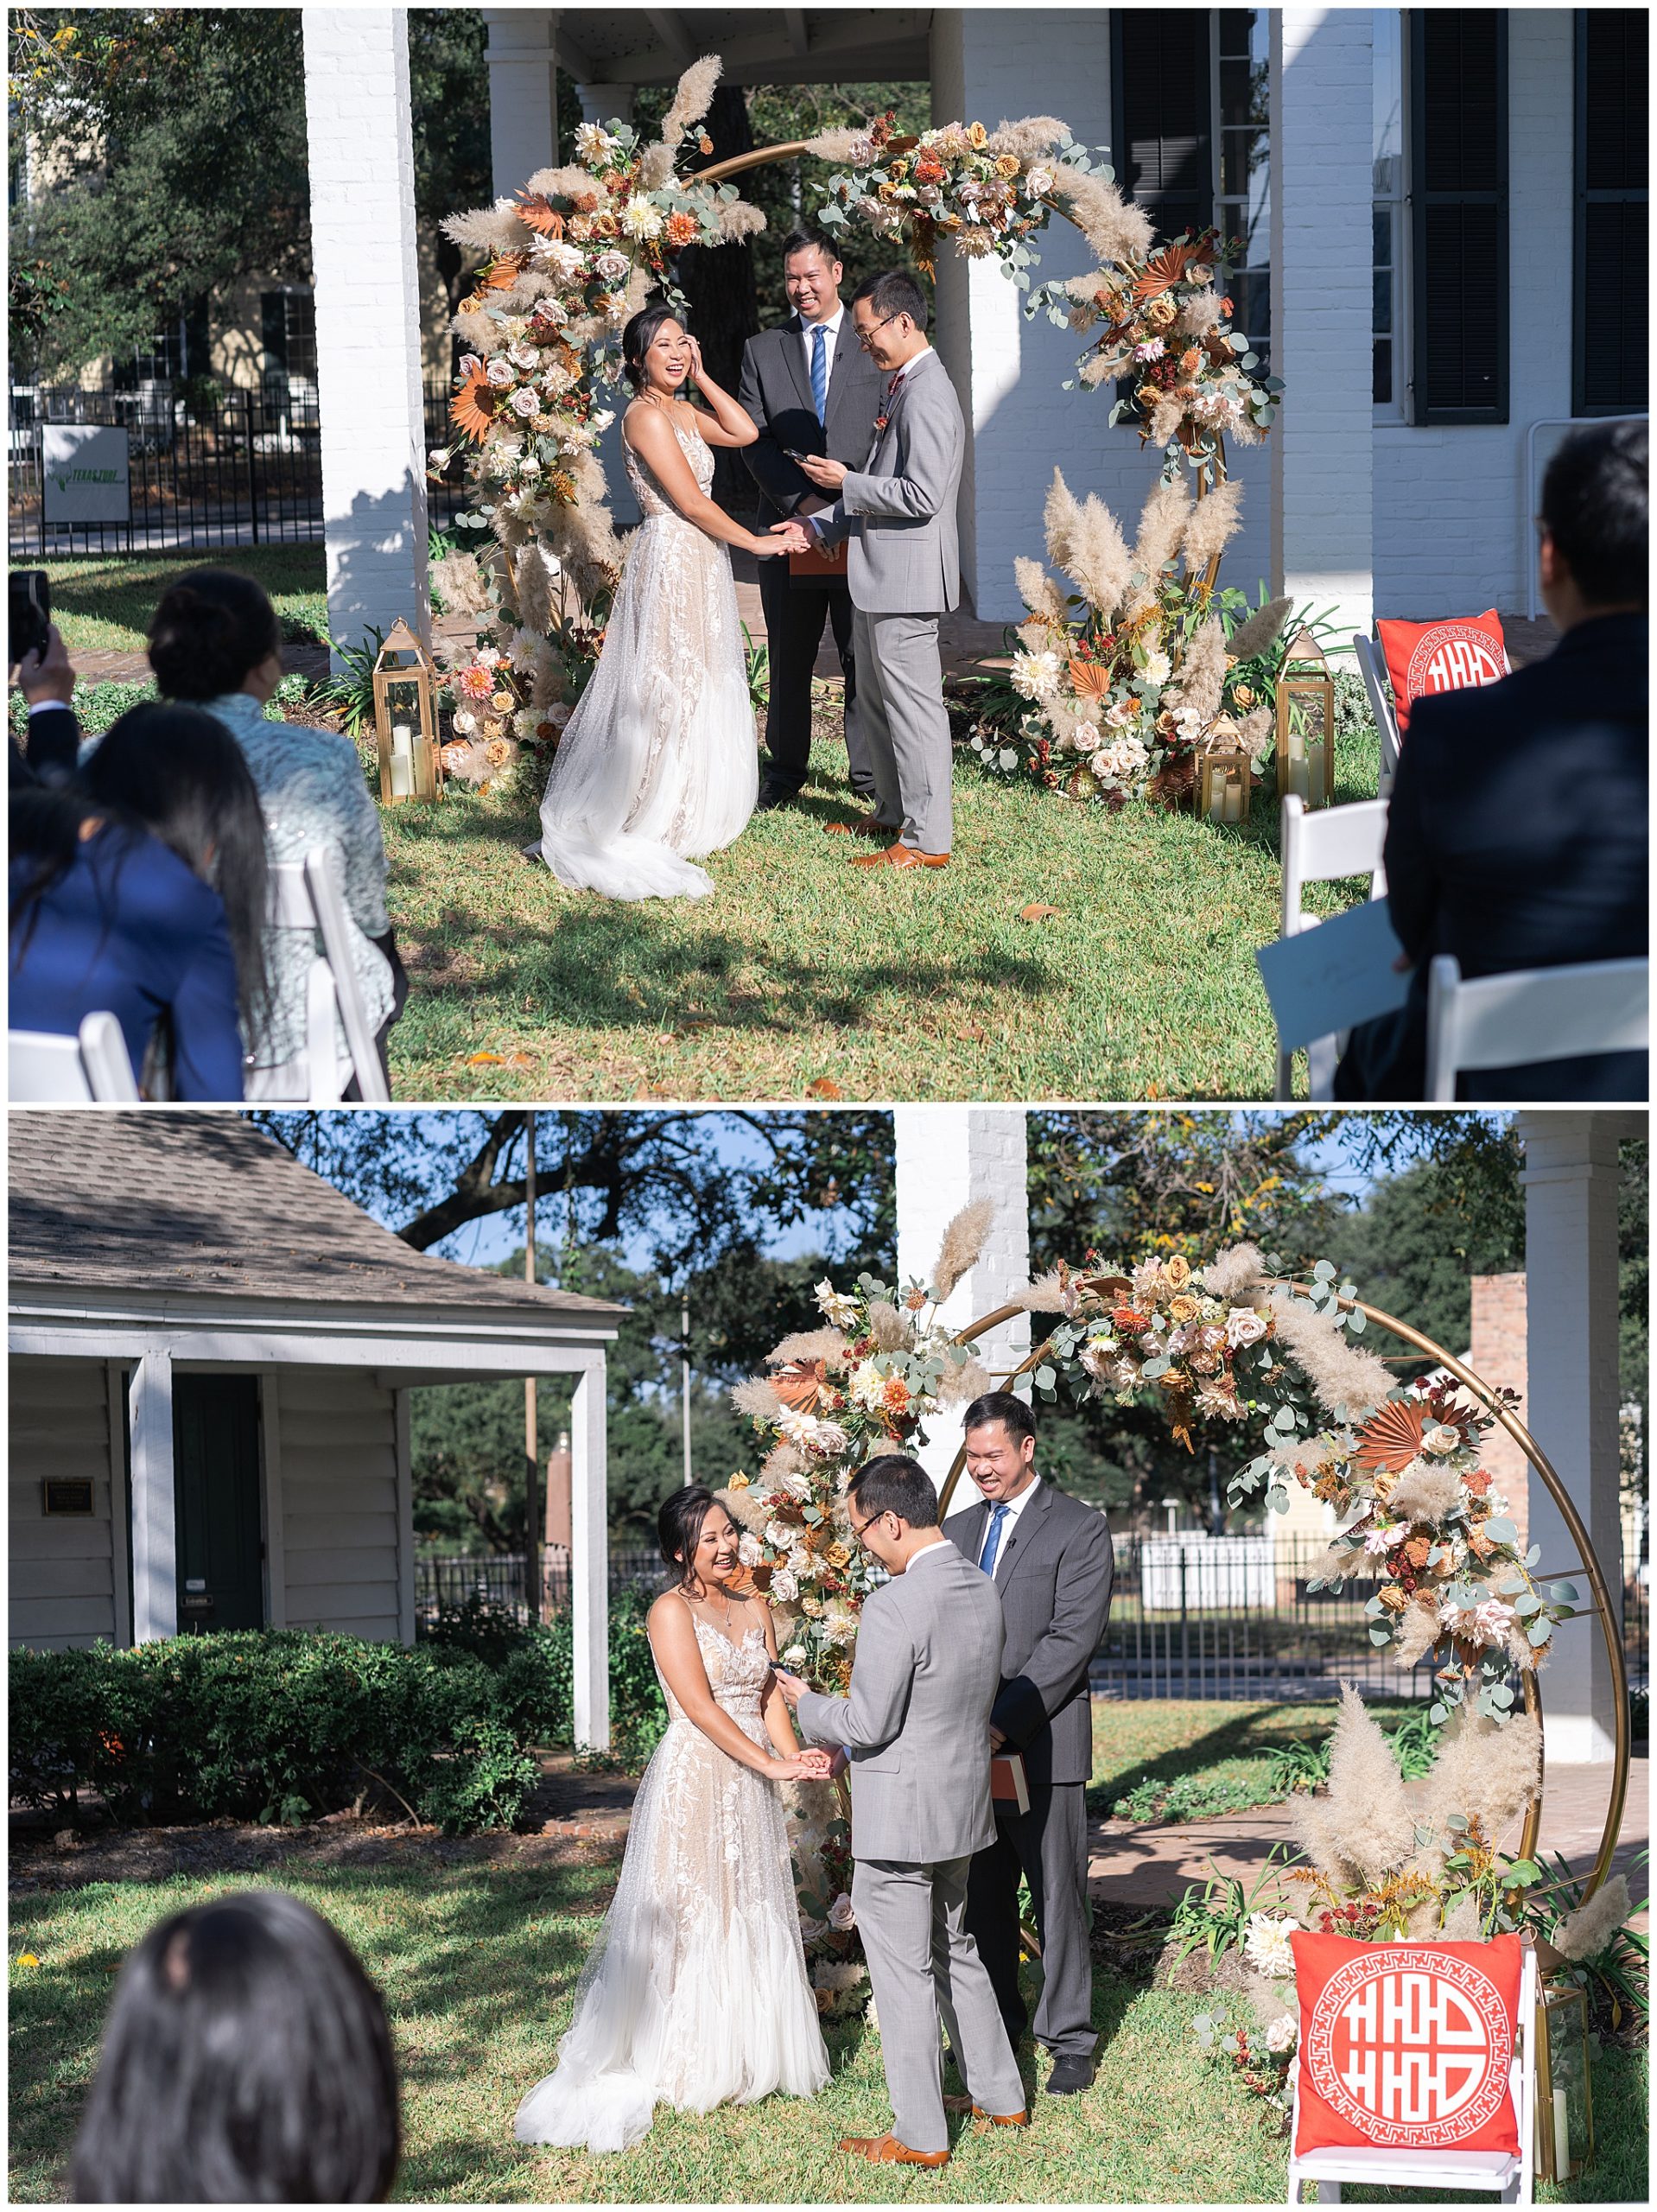 bride and groom during wedding ceremony at Houston wedding at the Heritage Society by Swish and Click Photography